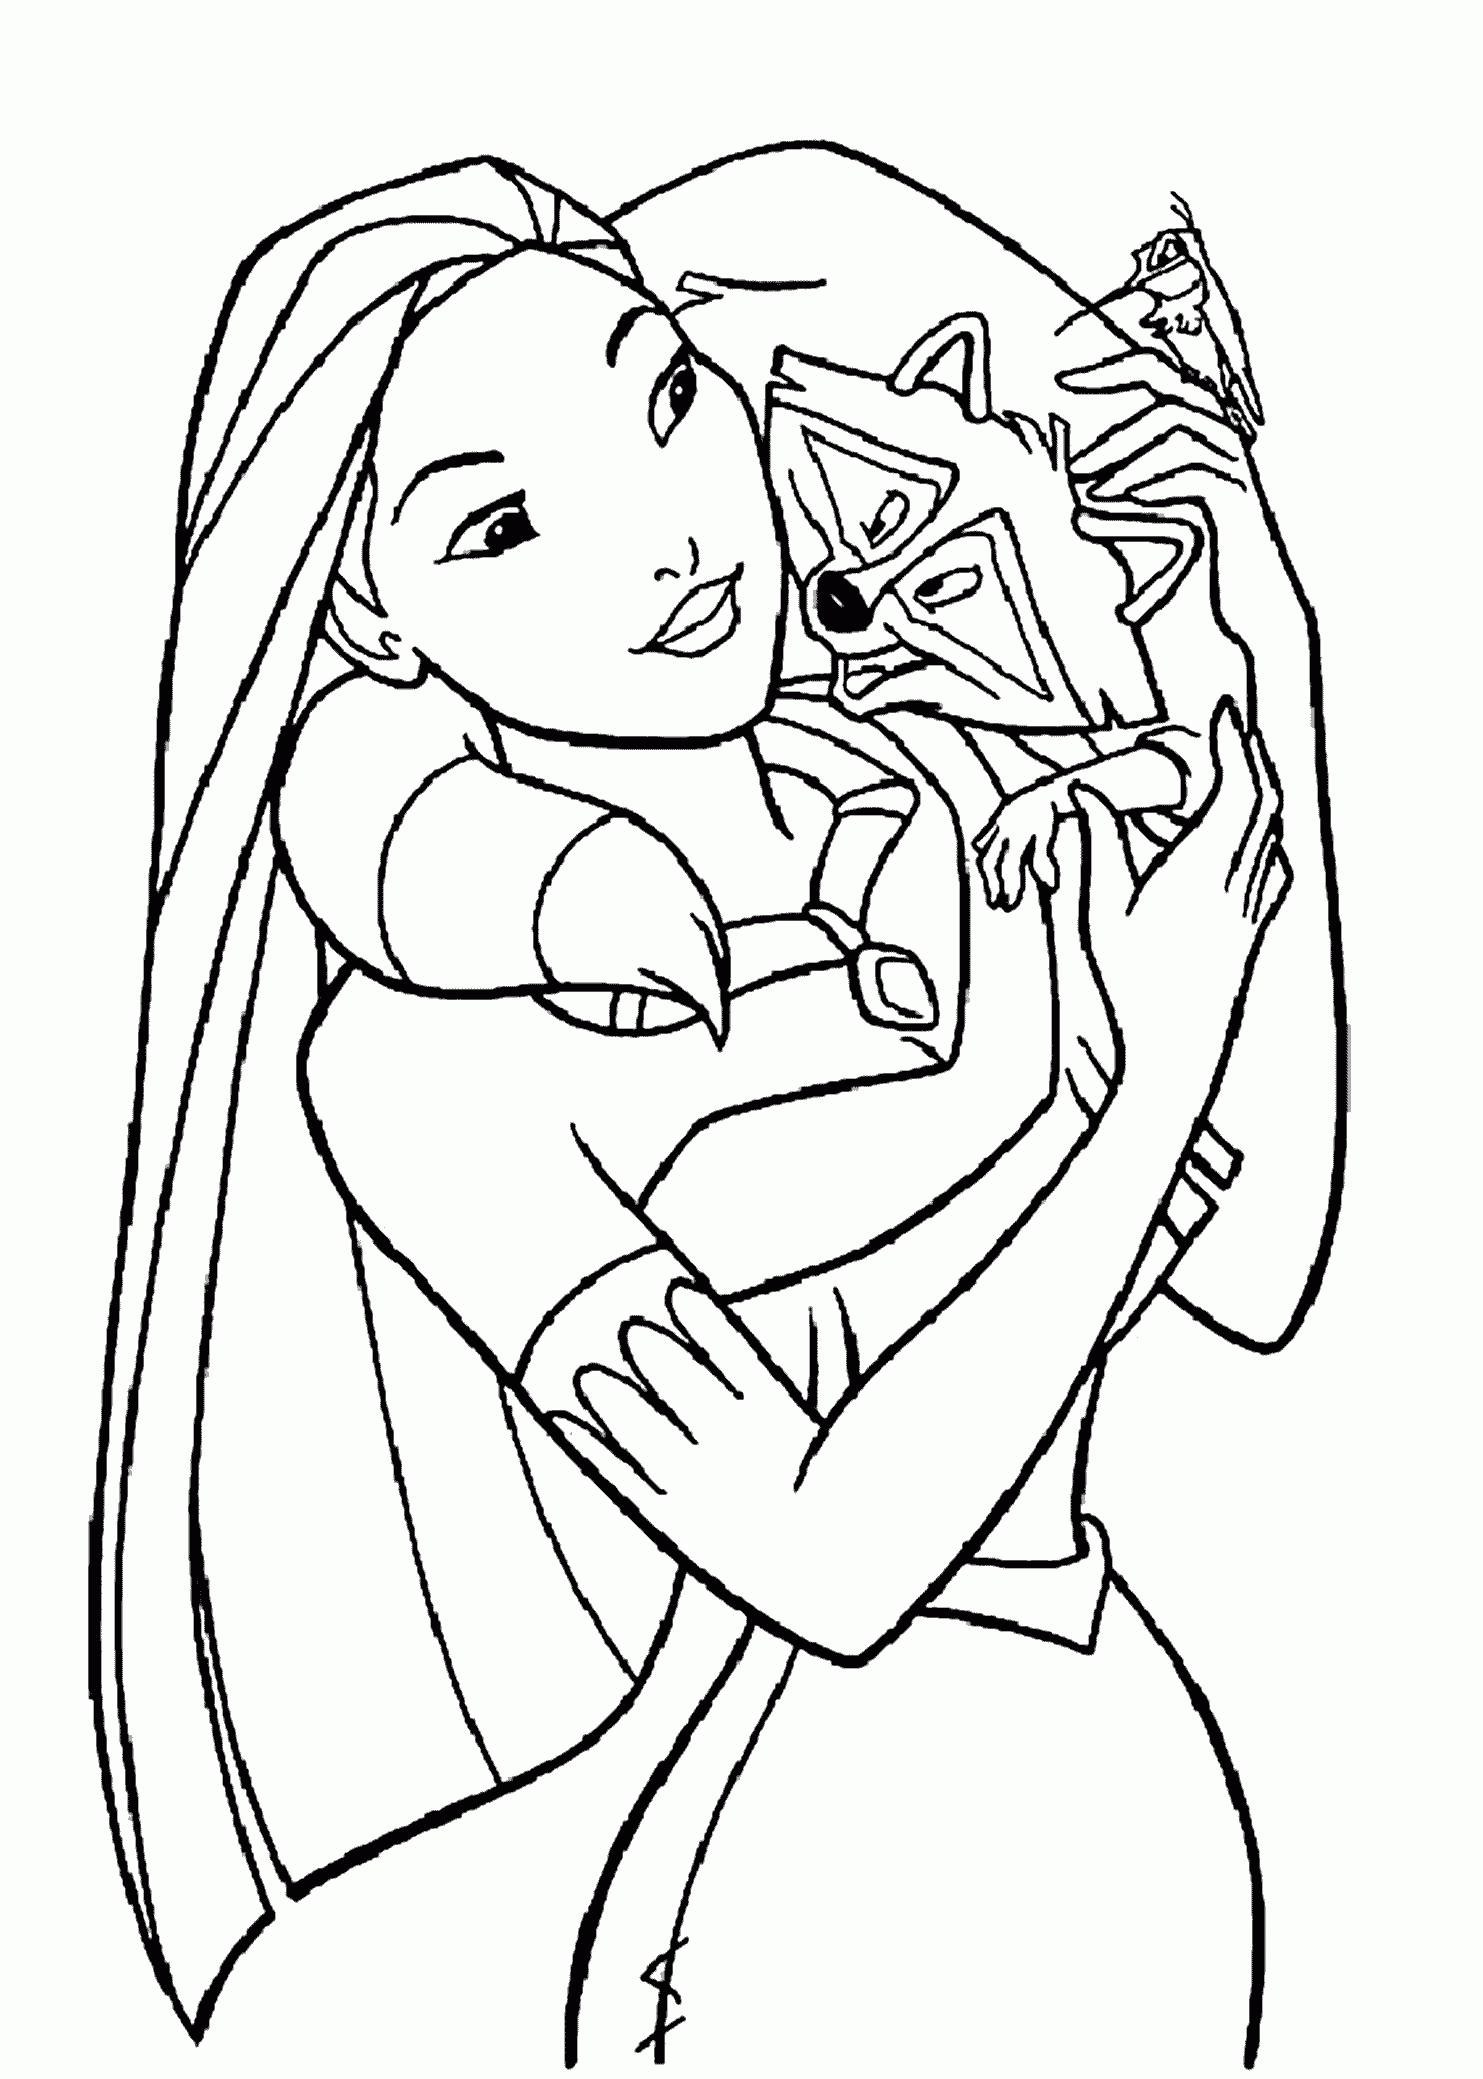 Related Pocahontas Coloring Pages item-13227, Pocahontas Coloring ...